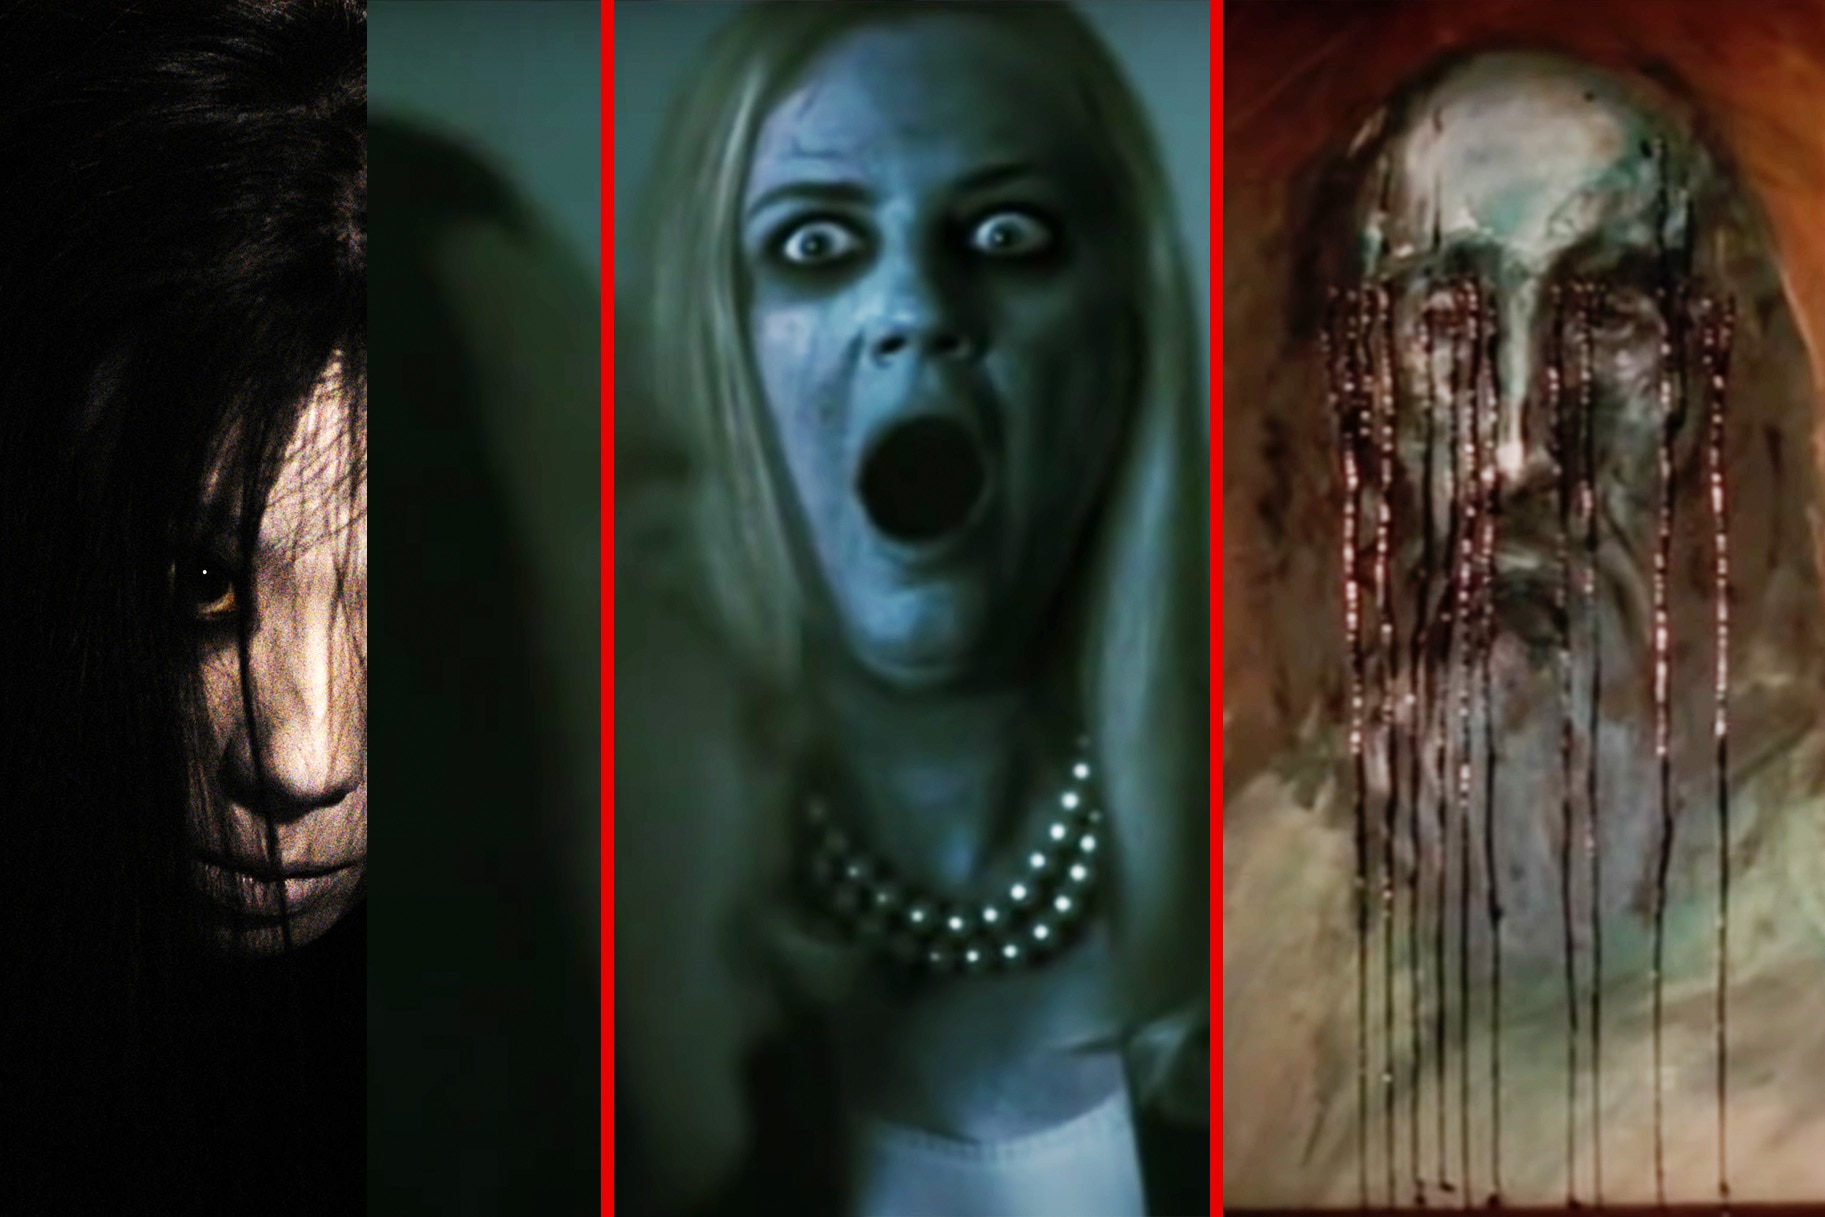 A collage featuring monsters from The Grudge (2004), Ju-On: The Grudge 2 (2006), and The Grudge 3 (2009).